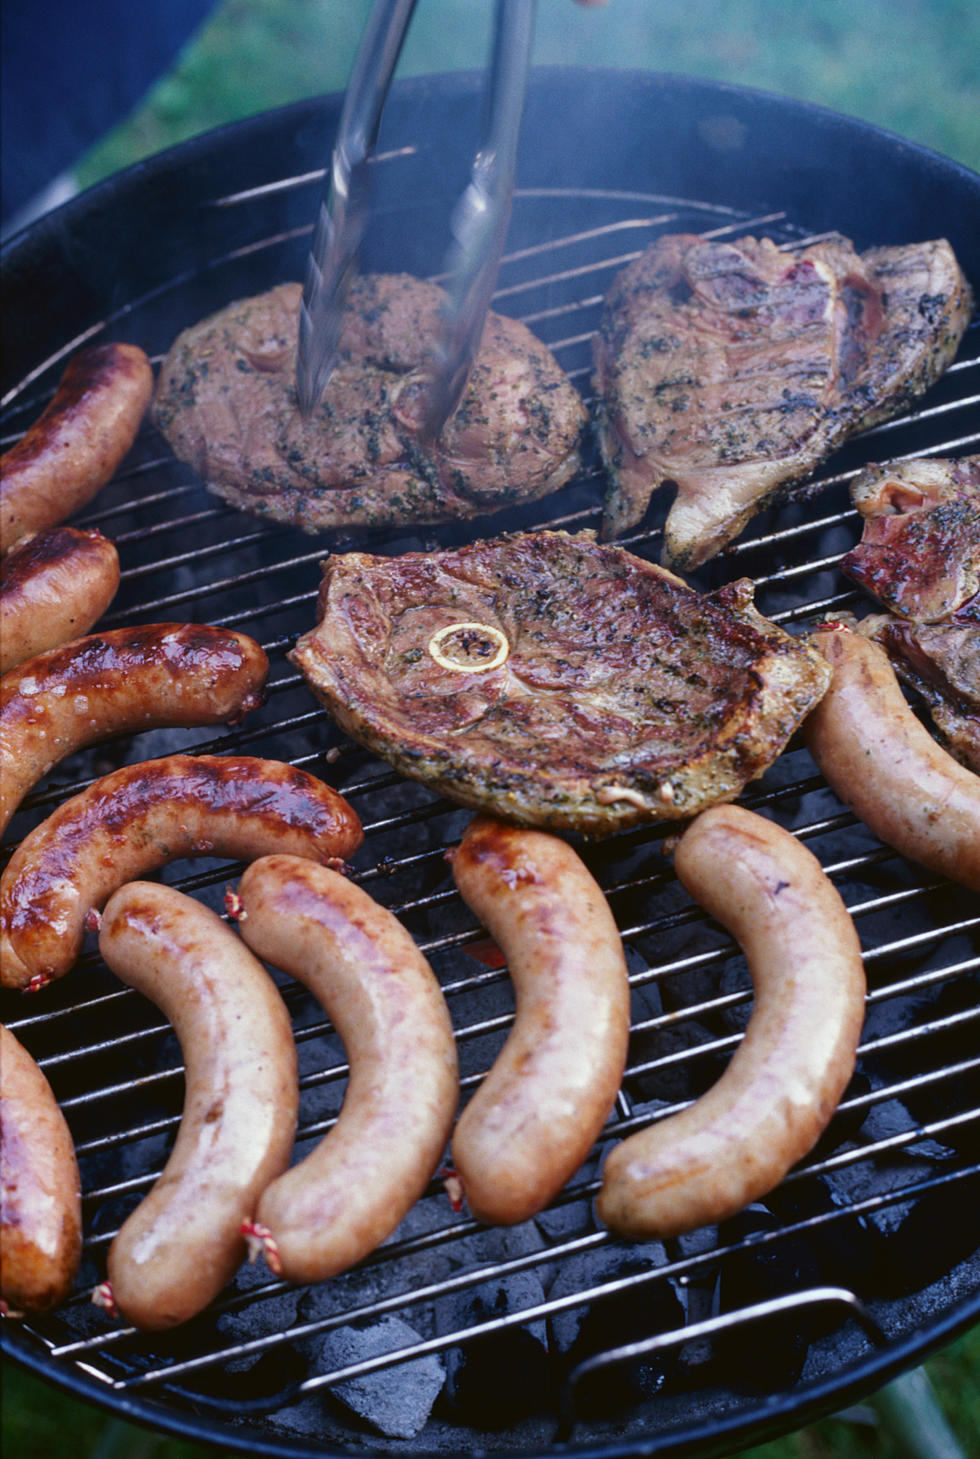 SAY WHAT? Survey Says Women May Be Better At Grilling